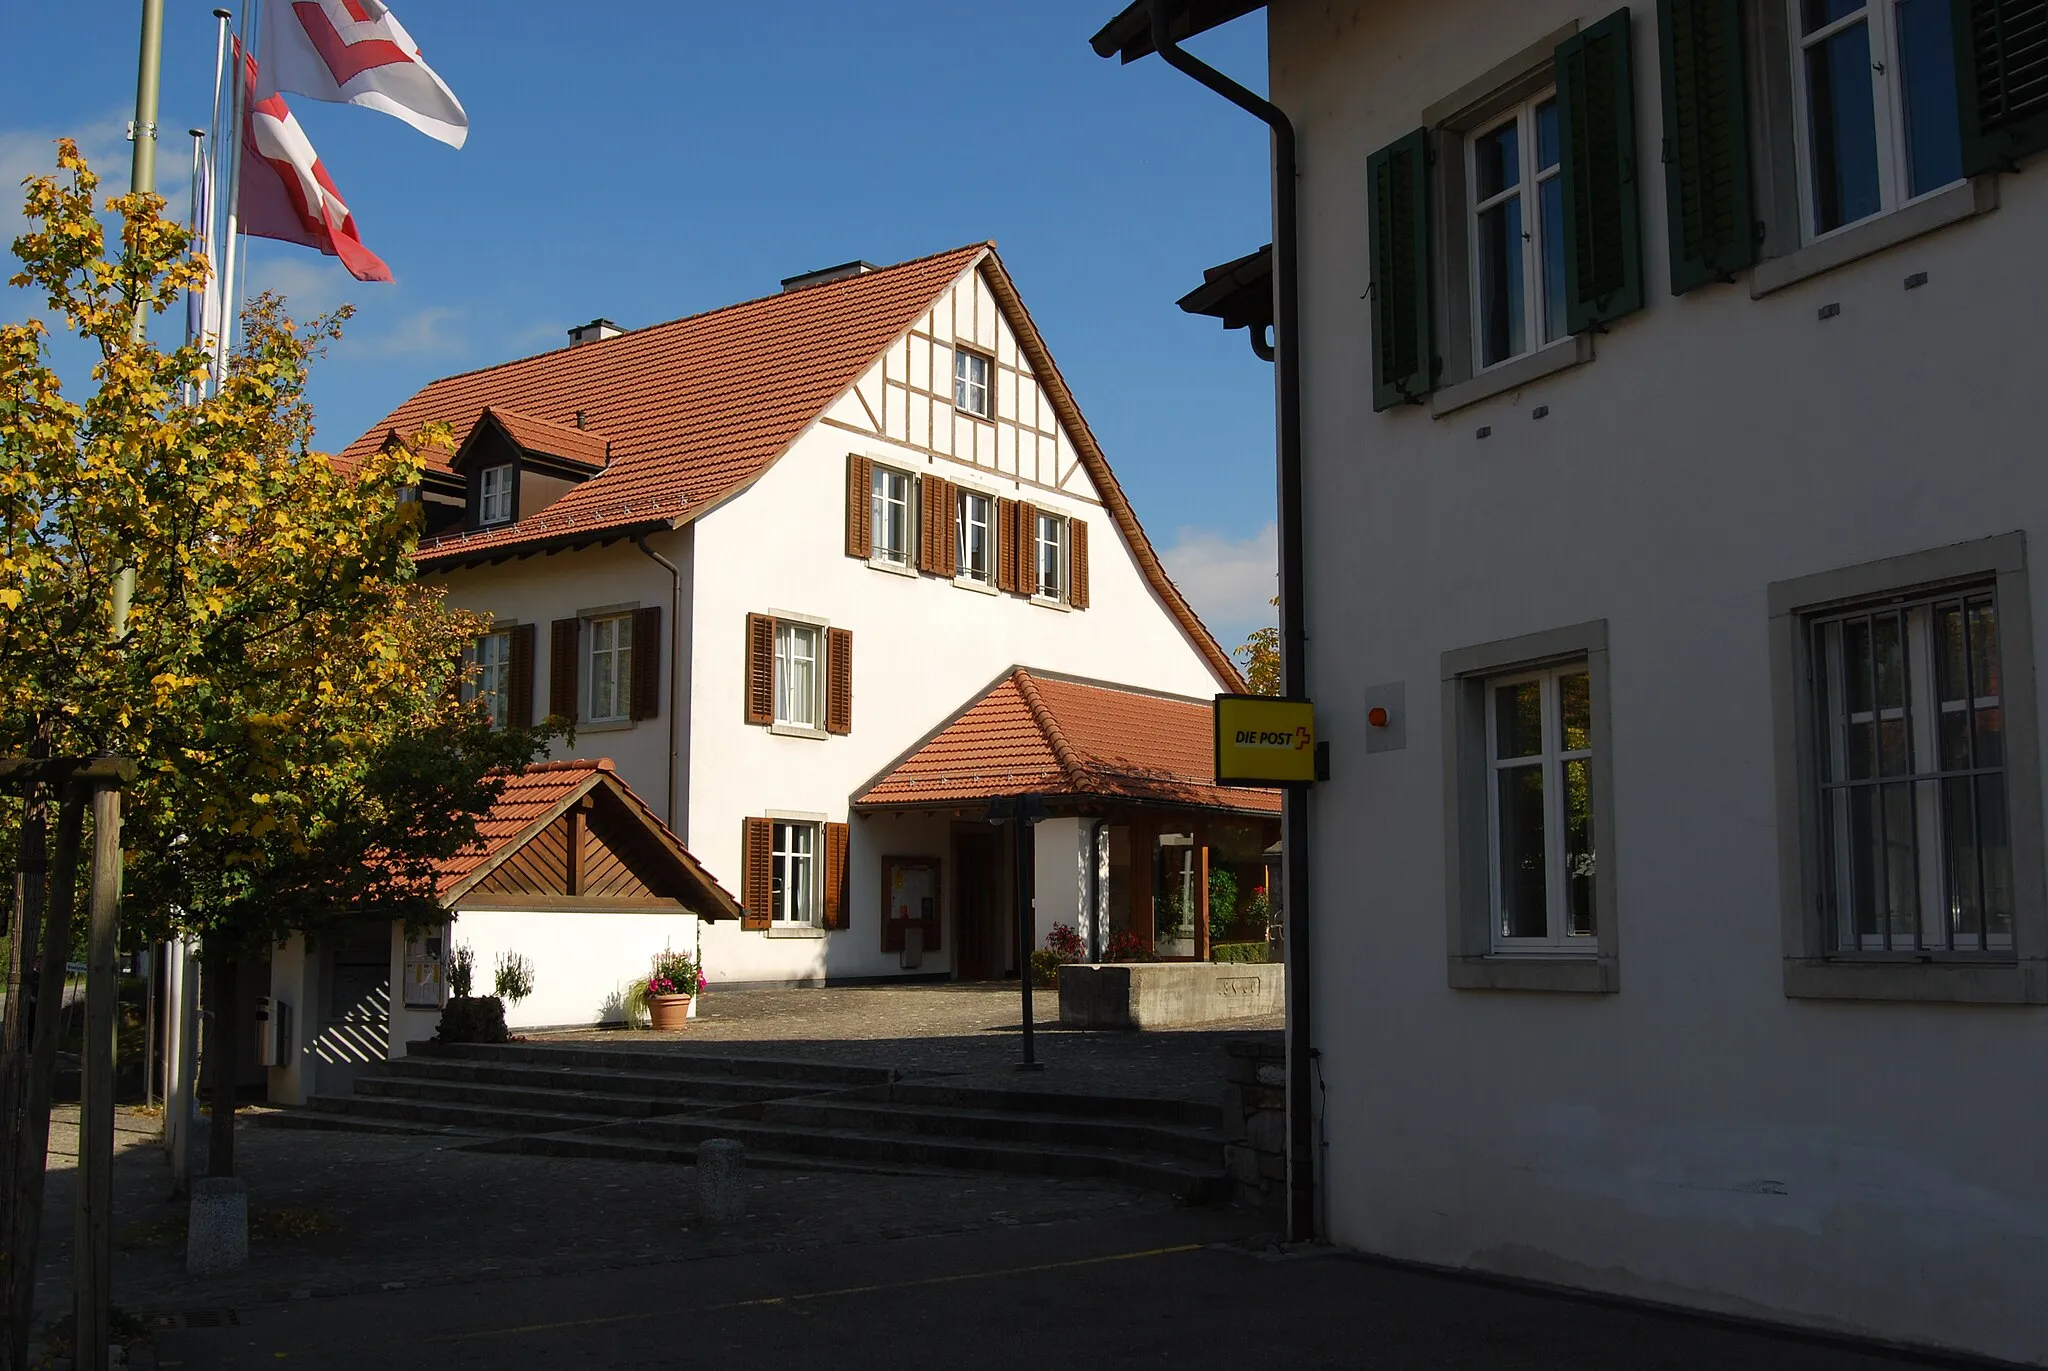 Photo showing: Municipal Administration and Post Office of Aesch, canton of Zürich, Switzerland